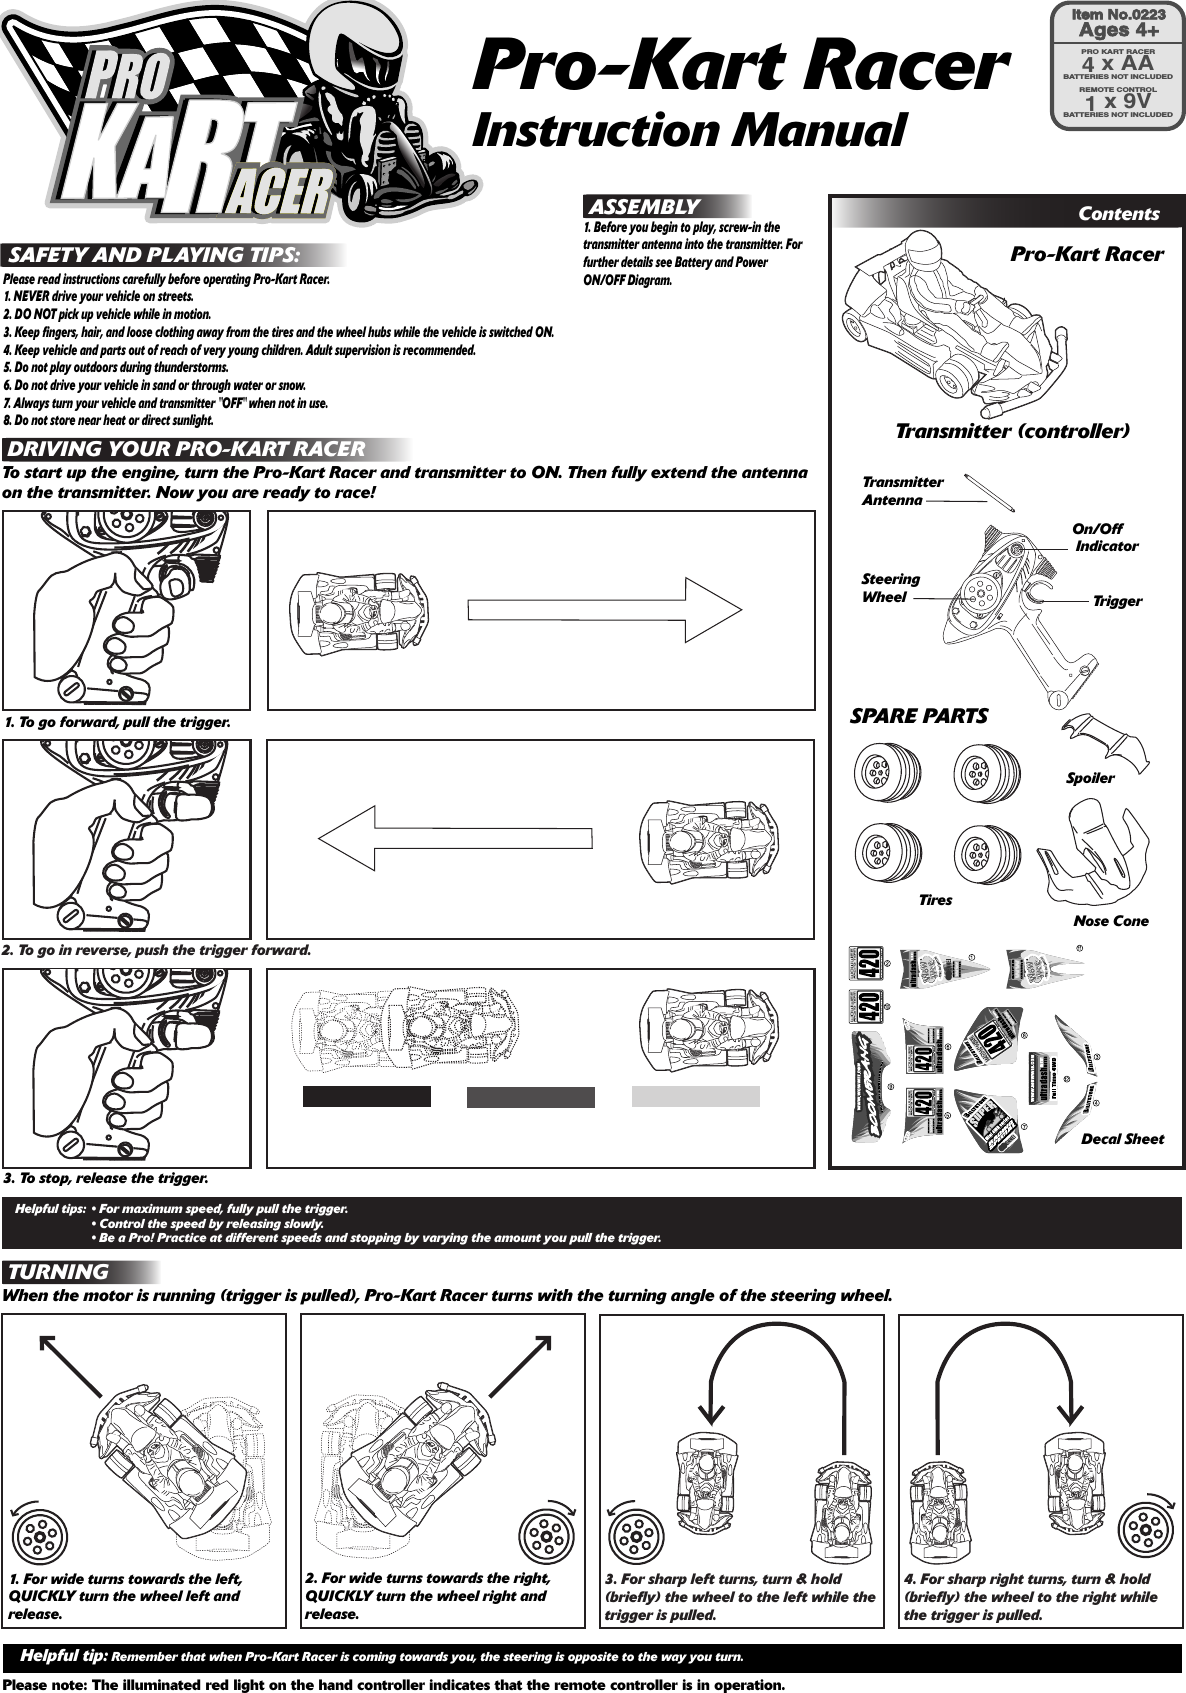 Pro-Kart RacerInstruction Manual SAFETY AND PLAYING TIPS:Please read instructions carefully before operating Pro-Kart Racer.1. NEVER drive your vehicle on streets.2. DO NOT pick up vehicle while in motion.3. Keep fingers, hair, and loose clothing away from the tires and the wheel hubs while the vehicle is switched ON.4. Keep vehicle and parts out of reach of very young children. Adult supervision is recommended.5. Do not play outdoors during thunderstorms.6. Do not drive your vehicle in sand or through water or snow.7. Always turn your vehicle and transmitter &quot;OFF&quot; when not in use.8. Do not store near heat or direct sunlight.DRIVING CONTROLSStarting to DriveHelpful tips: • For maximum speed, fully pull the trigger.    • Control the speed by releasing slowly. • Be a Pro! Practice at different speeds and stopping by varying the amount you pull the trigger.1. To go forward, pull the trigger.3. To stop, release the trigger.Helpful tip: Remember that when Pro-Kart Racer is coming towards you, the steering is opposite to the way you turn.Please note: The illuminated red light on the hand controller indicates that the remote controller is in operation. DRIVING YOUR PRO-KART RACERTo start up the engine, turn the Pro-Kart Racer and transmitter to ON. Then fully extend the antenna on the transmitter. Now you are ready to race!2. To go in reverse, push the trigger forward.1. For wide turns towards the left, QUICKLY turn the wheel left and release.2. For wide turns towards the right, QUICKLY turn the wheel right and release.3. For sharp left turns, turn &amp; hold (briefly) the wheel to the left while the trigger is pulled.4. For sharp right turns, turn &amp; hold (briefly) the wheel to the right while the trigger is pulled.Transmitter (controller)Pro-Kart RacerContentsNose ConeTiresSpoilerSPARE PARTSSteering Wheel TriggerOn/Off Indicator TURNINGWhen the motor is running (trigger is pulled), Pro-Kart Racer turns with the turning angle of the steering wheel.Transmitter AntennaDecal Sheet ASSEMBLY1. Before you begin to play, screw-in the transmitter antenna into the transmitter. For further details see Battery and Power ON/OFF Diagram.Item No.0223Ages 4+PRO KART RACER4 x AABATTERIES NOT INCLUDEDREMOTE CONTROL1 x 9VBATTERIES NOT INCLUDED